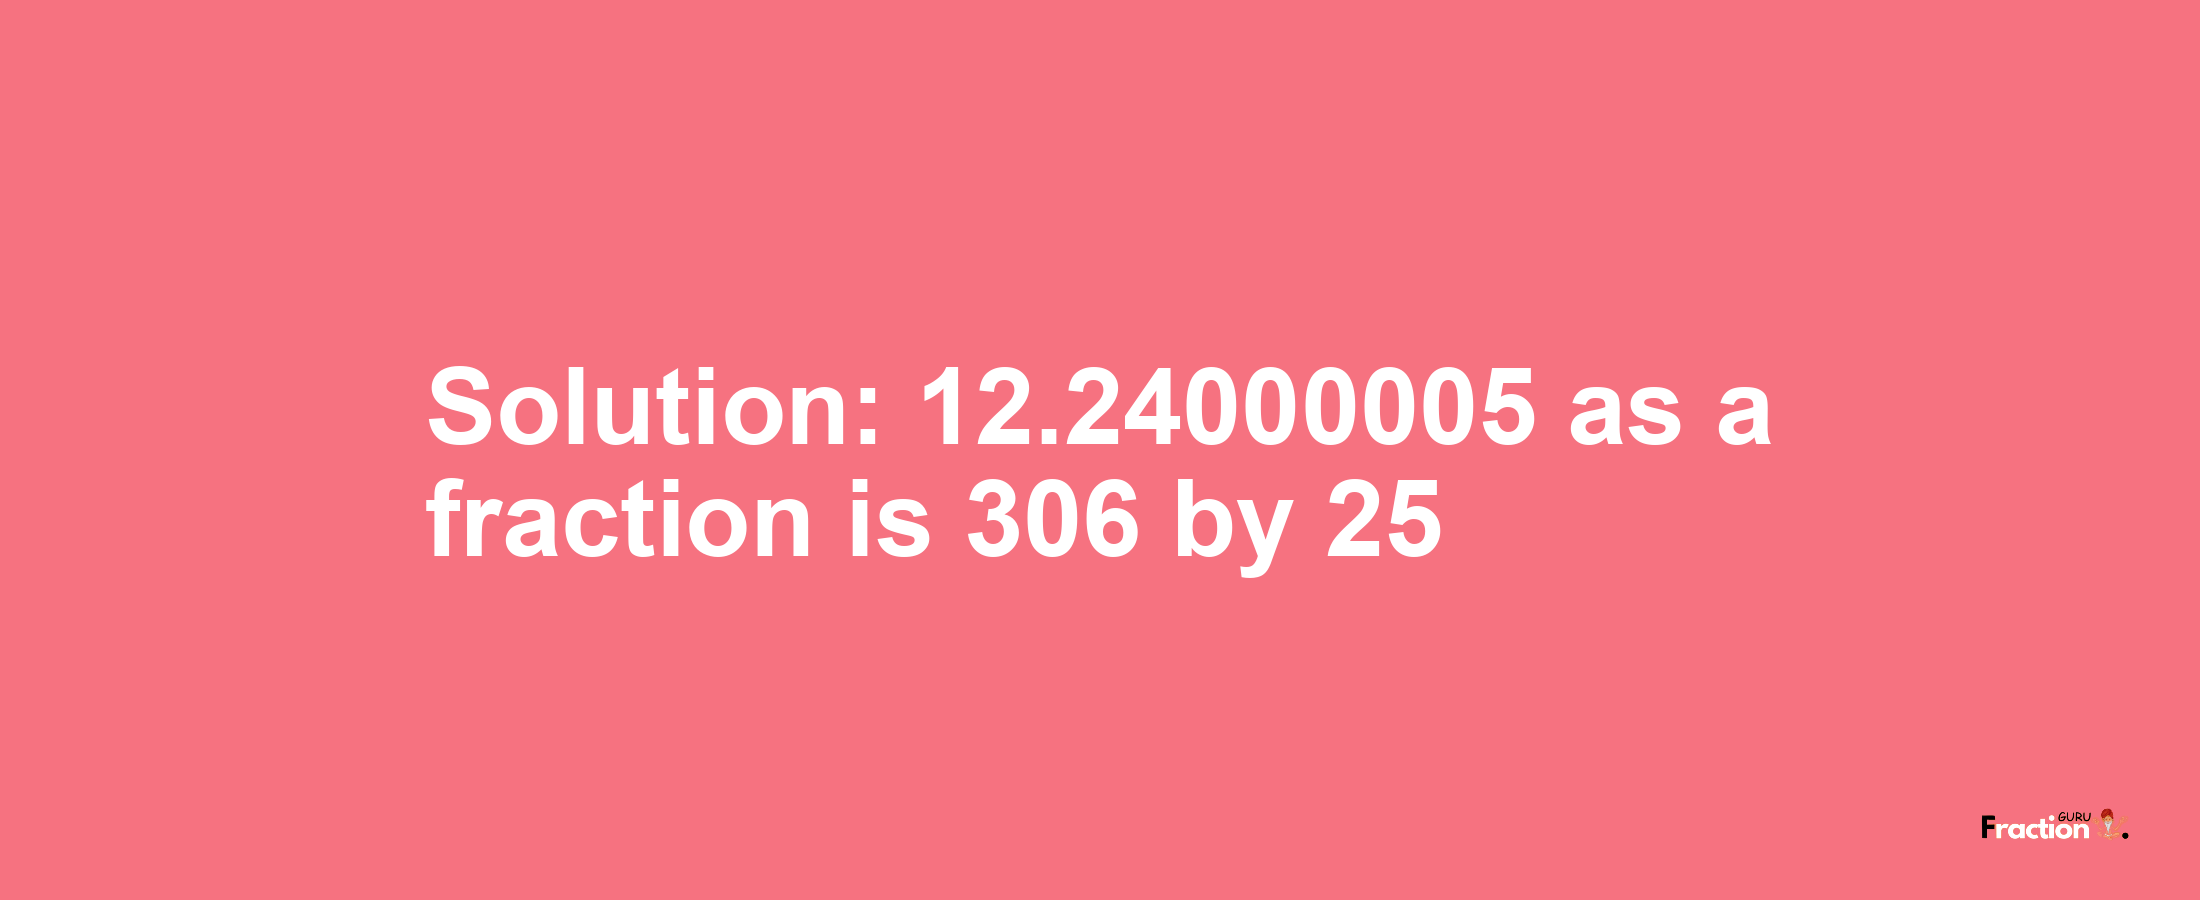 Solution:12.24000005 as a fraction is 306/25